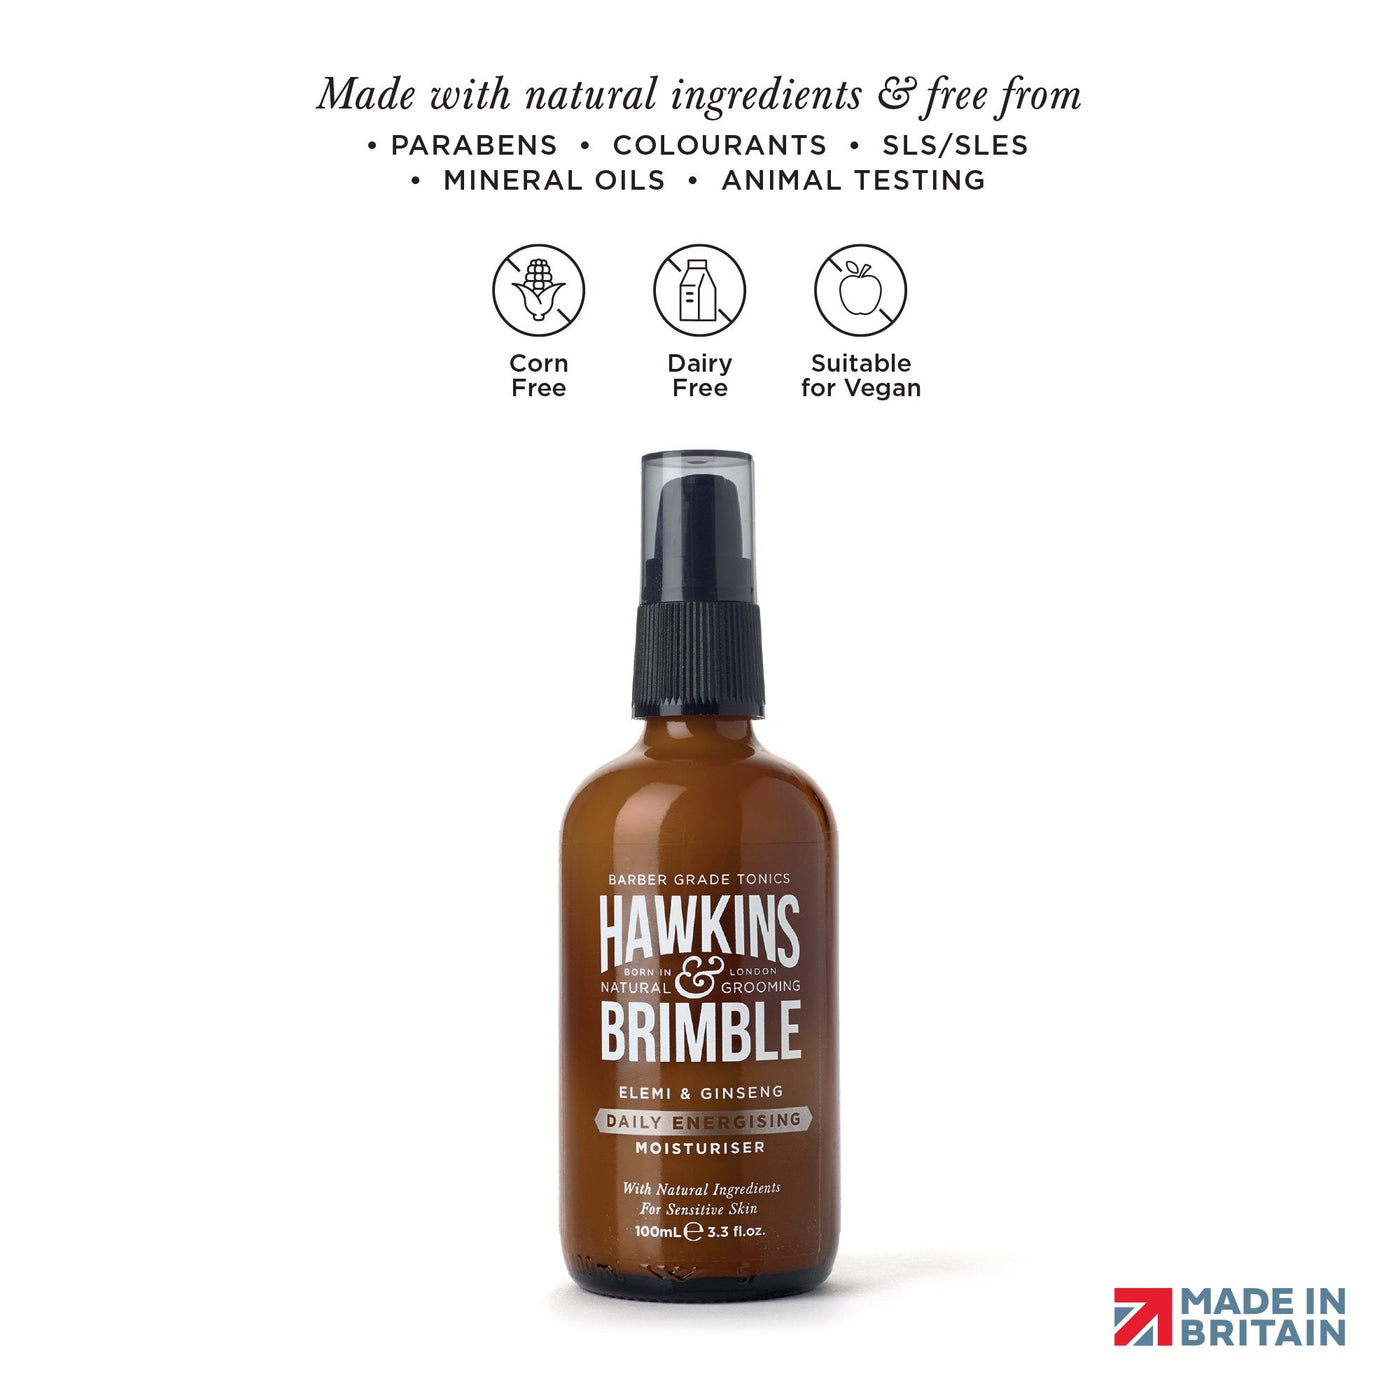 Daily Energising Moisturiser - Skin Care - Hawkins & Brimble Barbershop Male Grooming Products for Beards and Hair